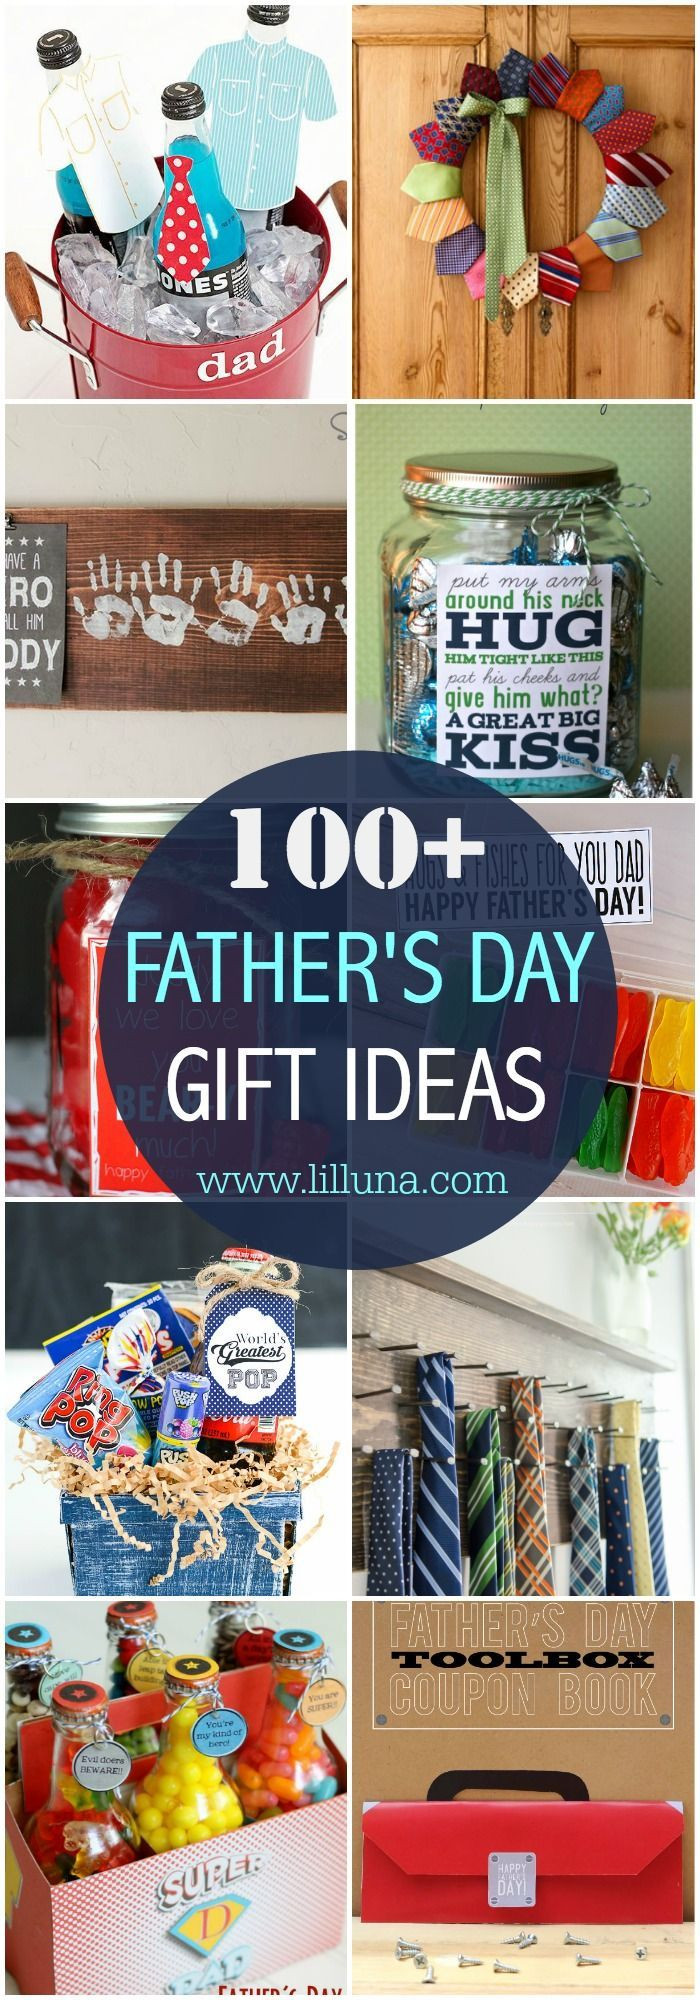 Simple Fathers Day Gift Ideas
 838 best Father s day crafts ts and ideas images on